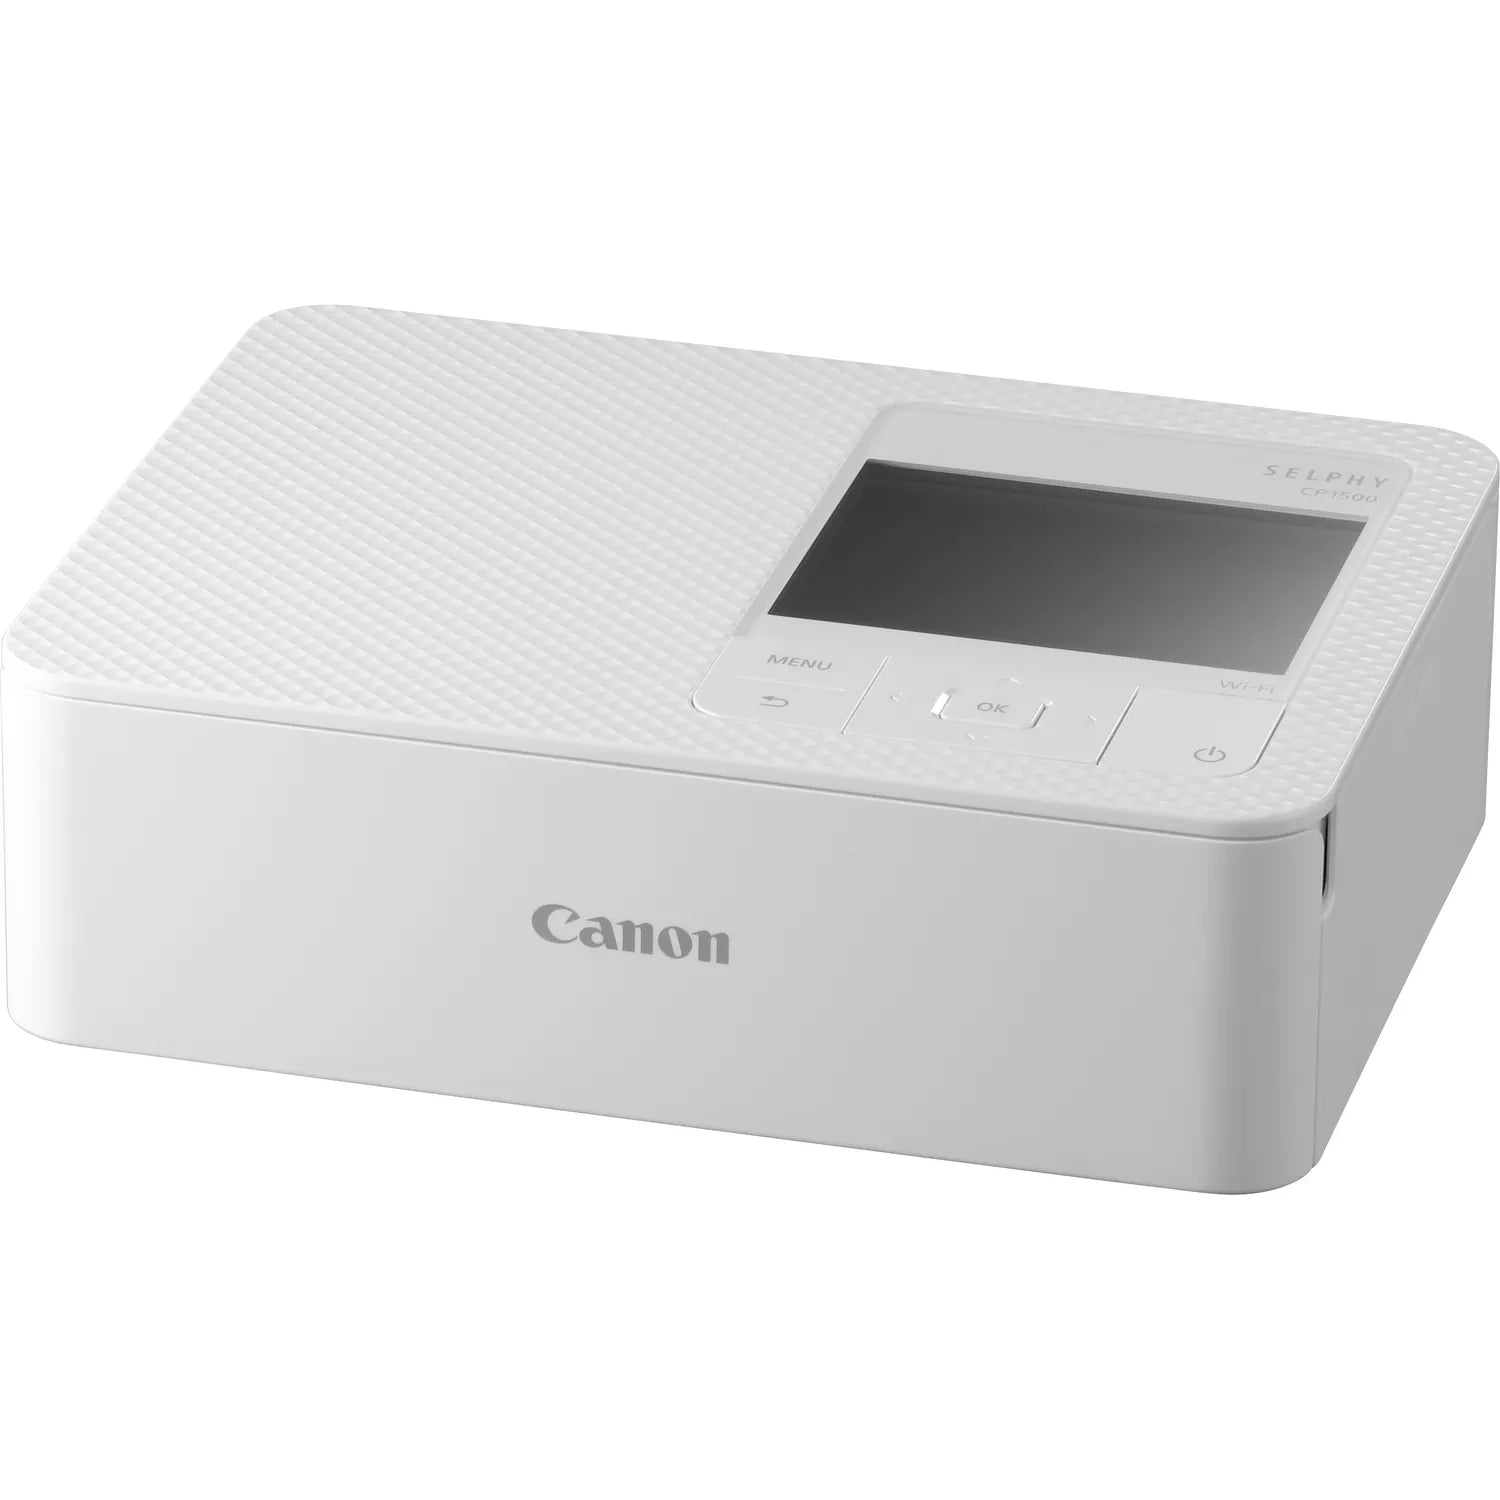 Clearance Canon SELPHY CP1500 Printer - White